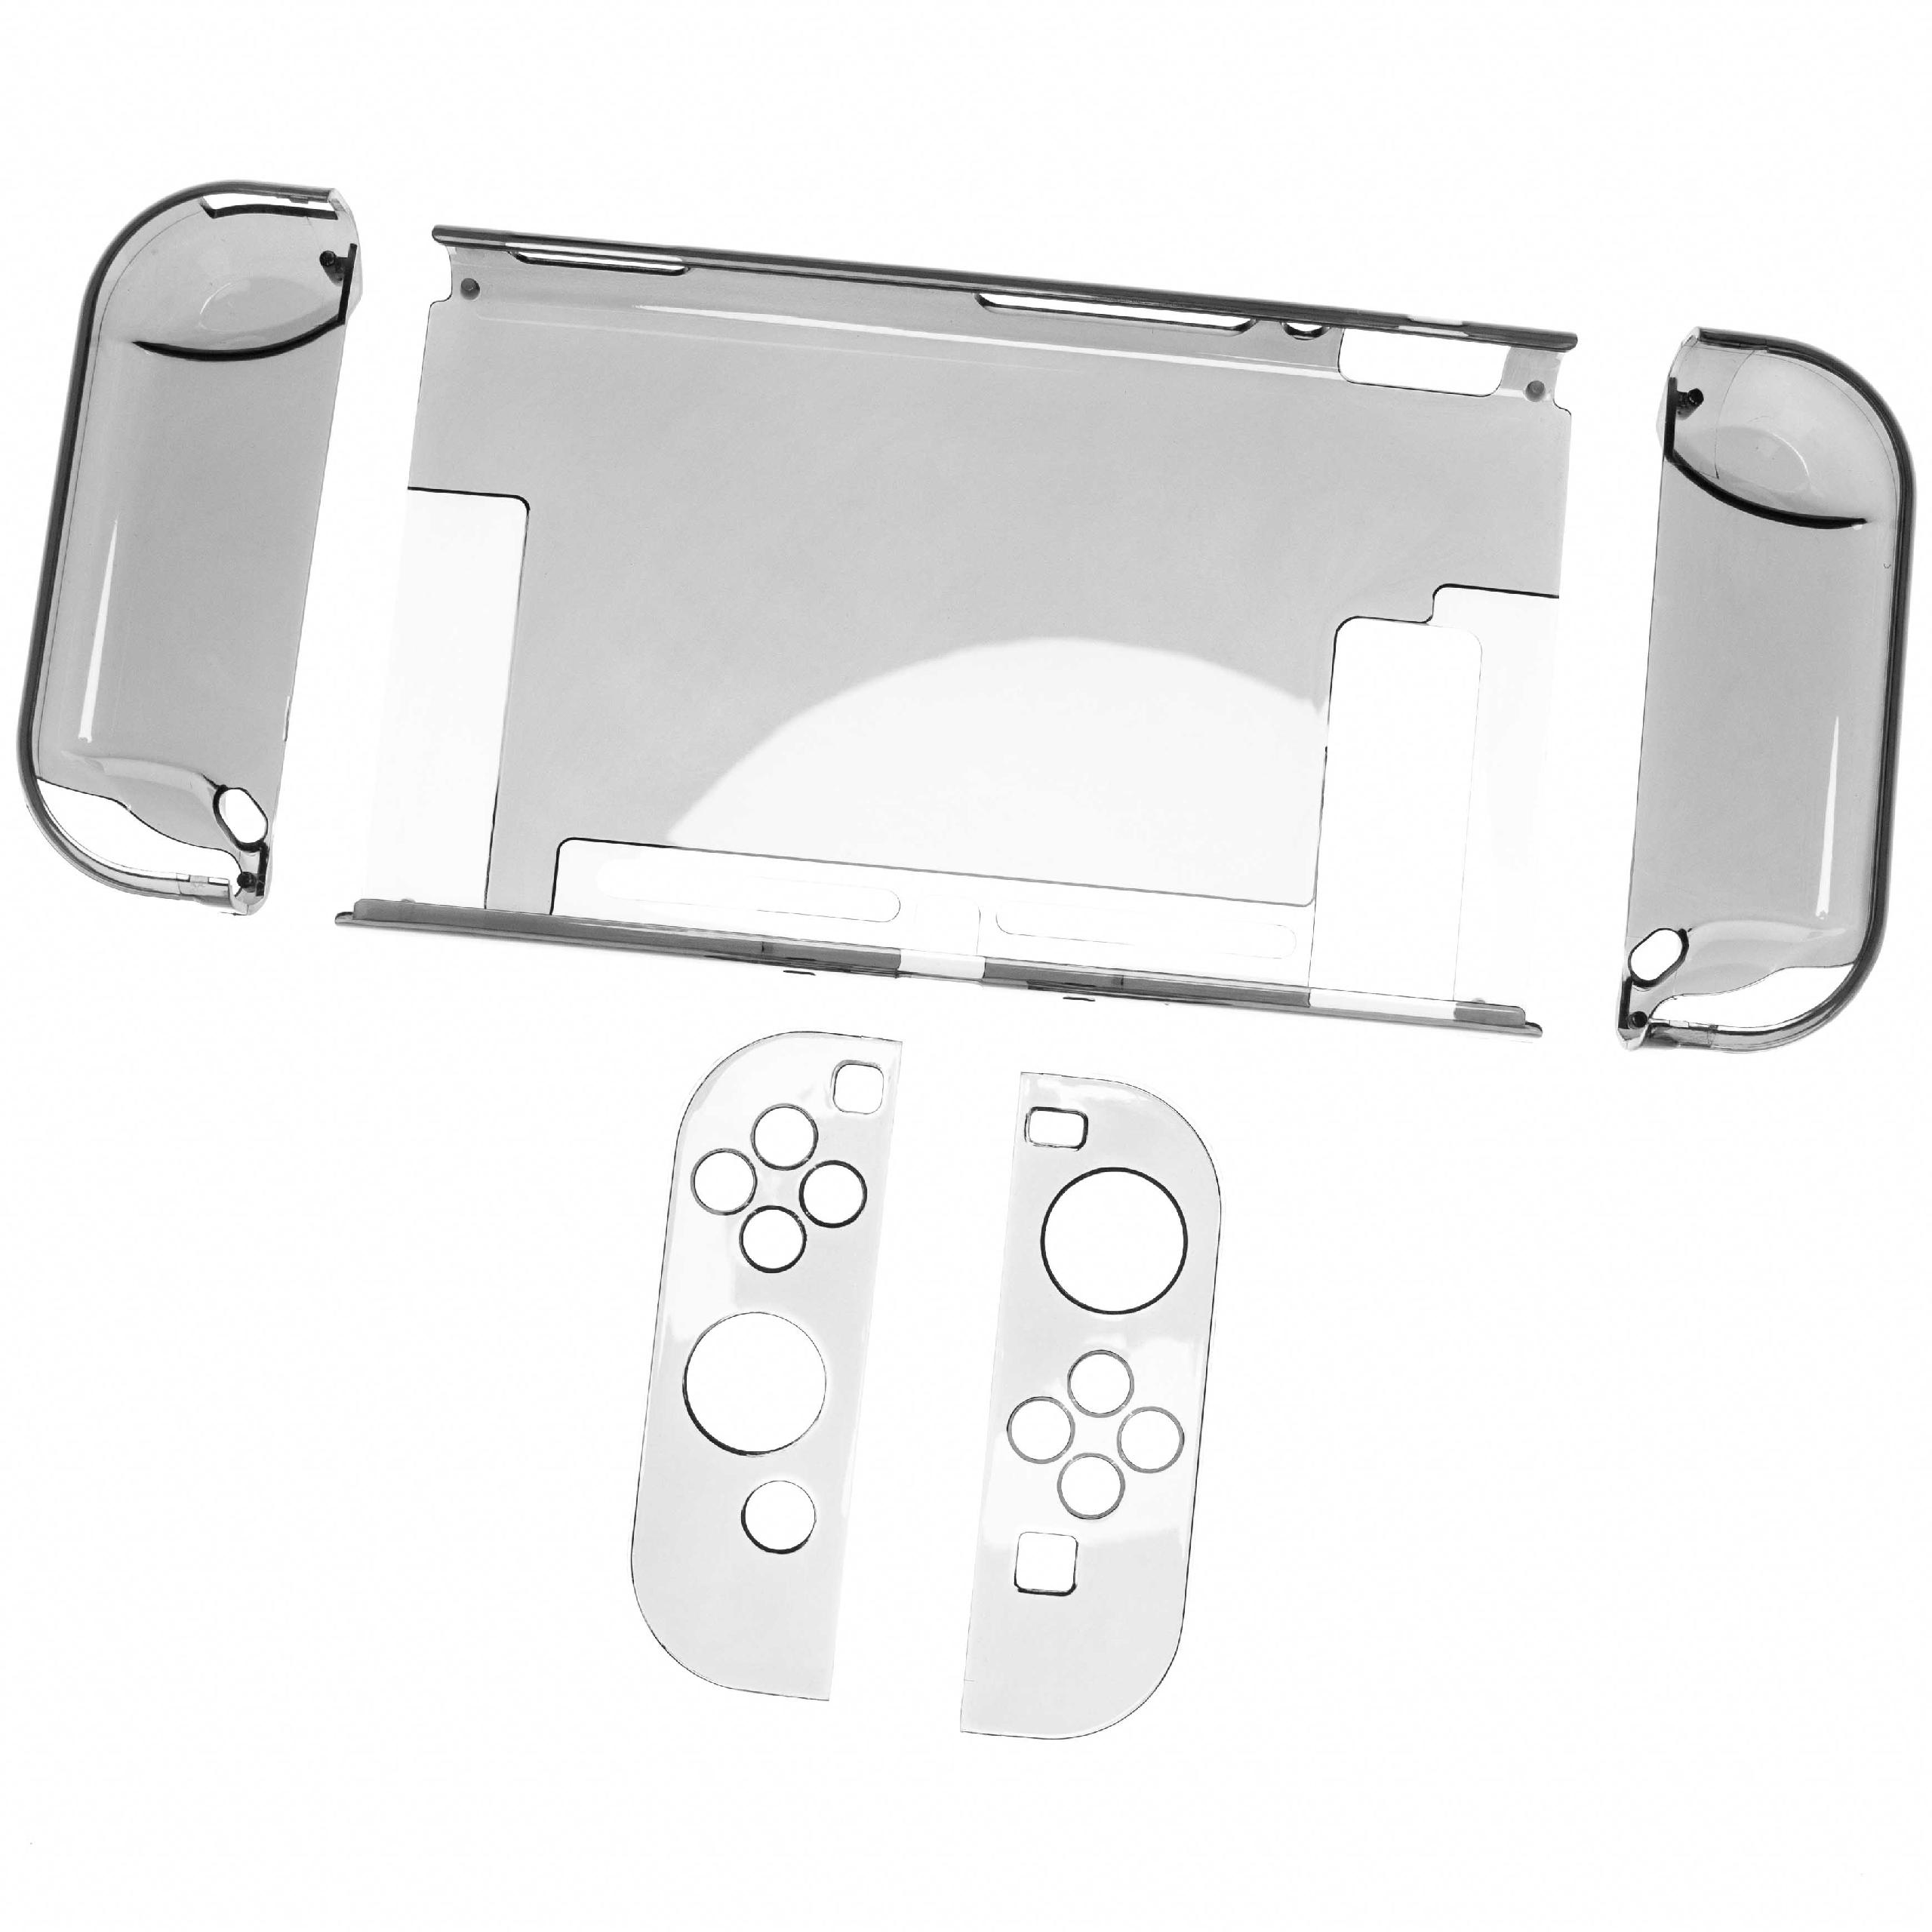 Cover suitable for Nintendo Switch Gaming Console - Case, Polycarbonate, Black Transparent